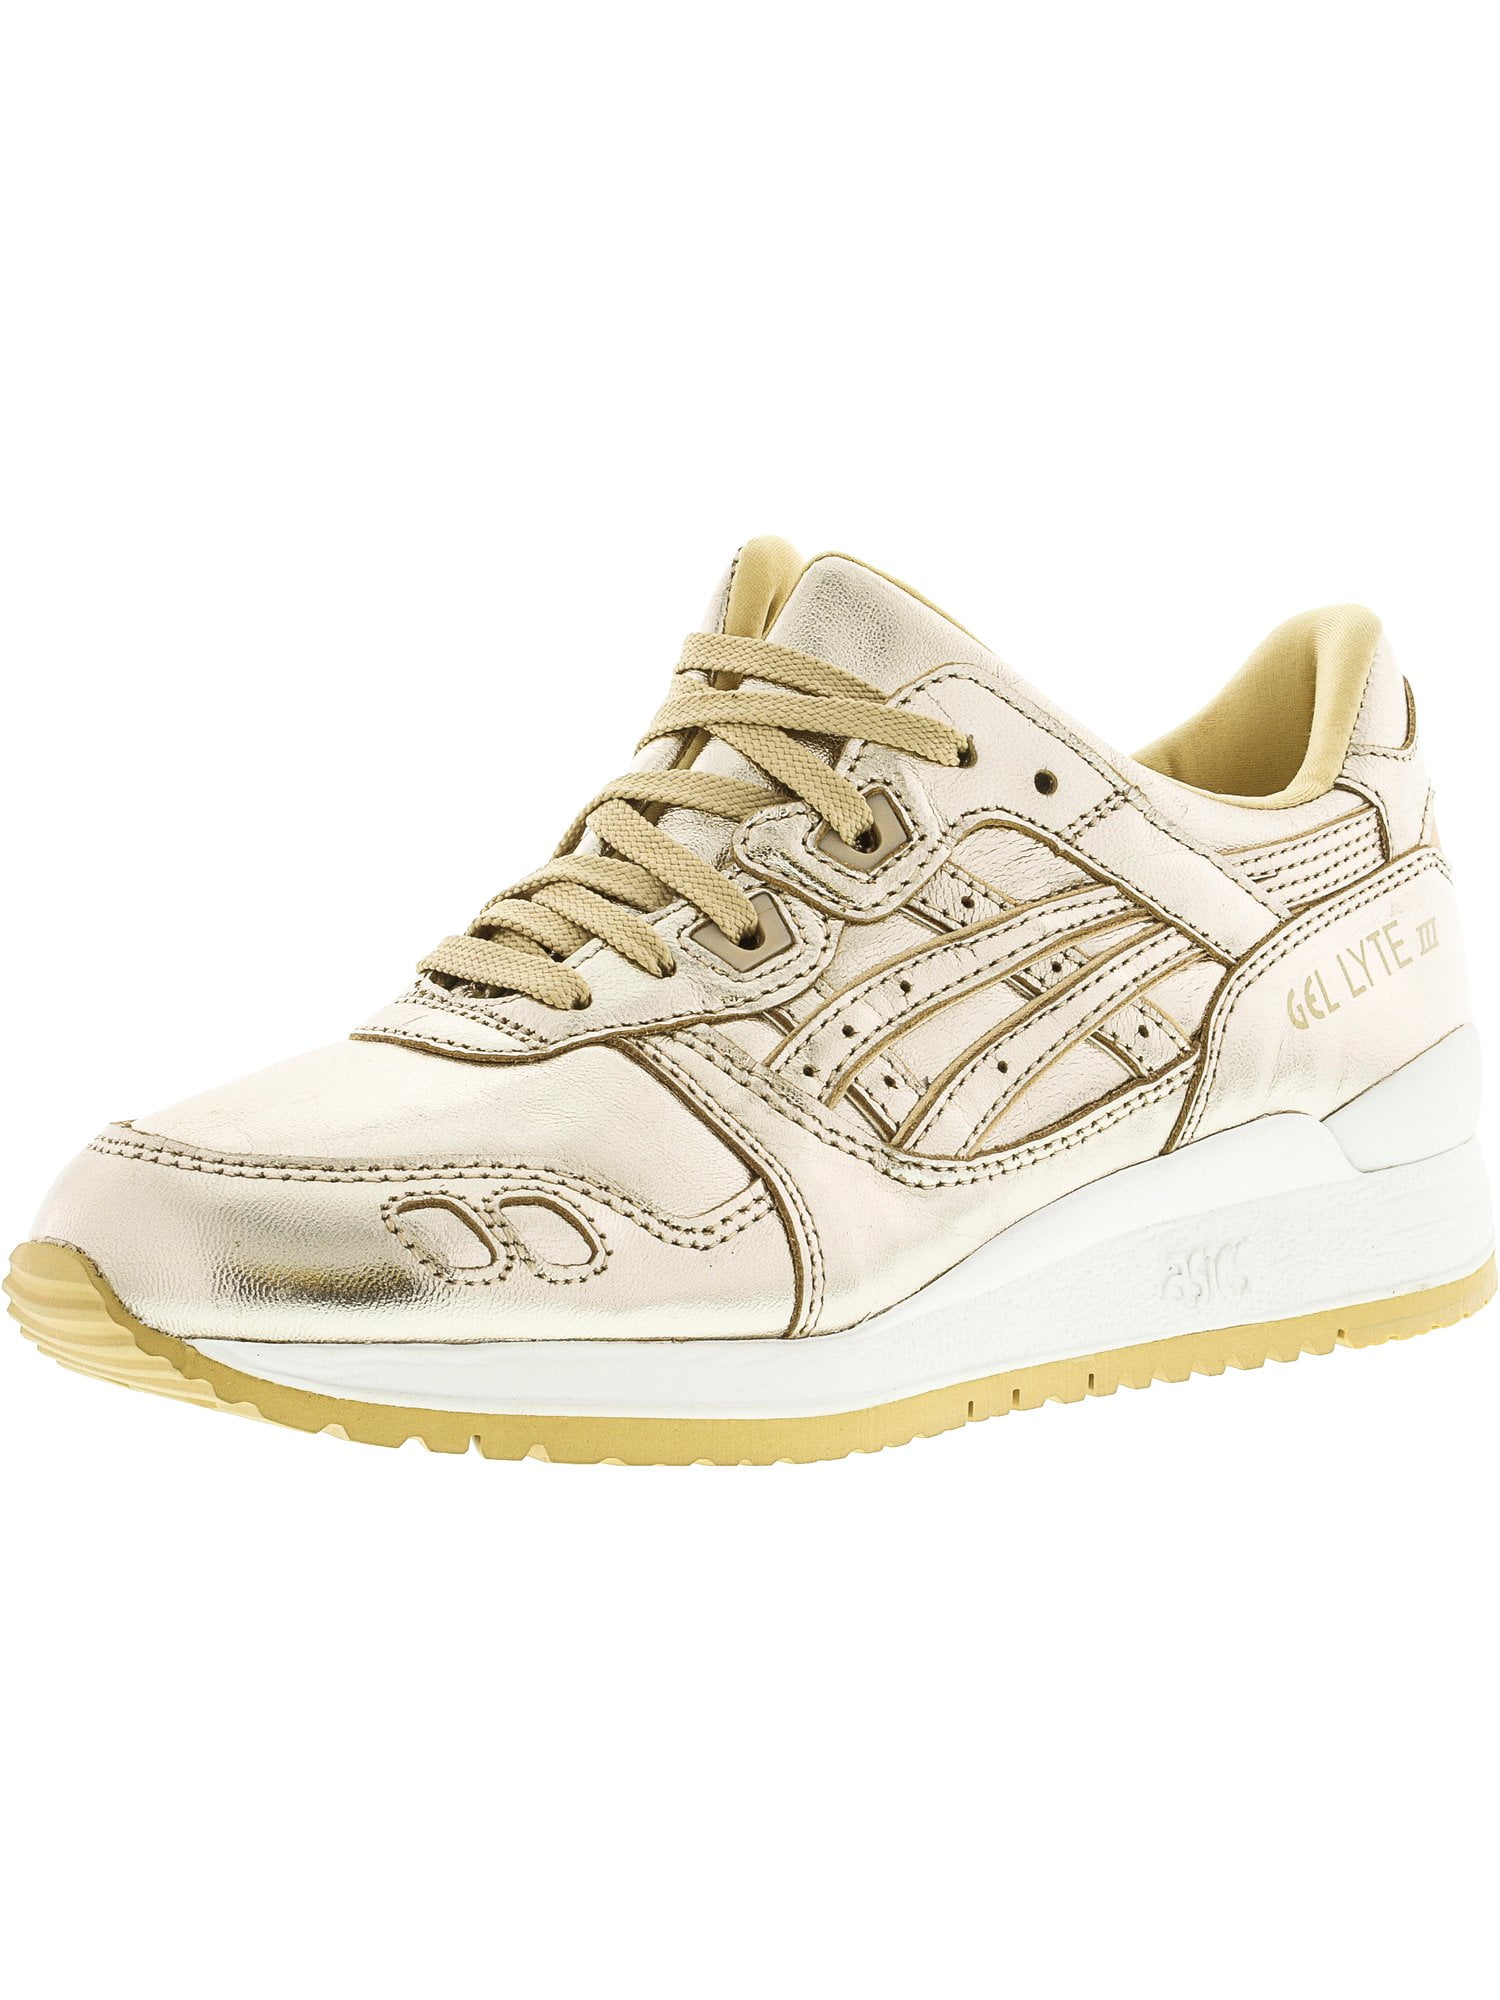 asics womens shoes fashion sneakers